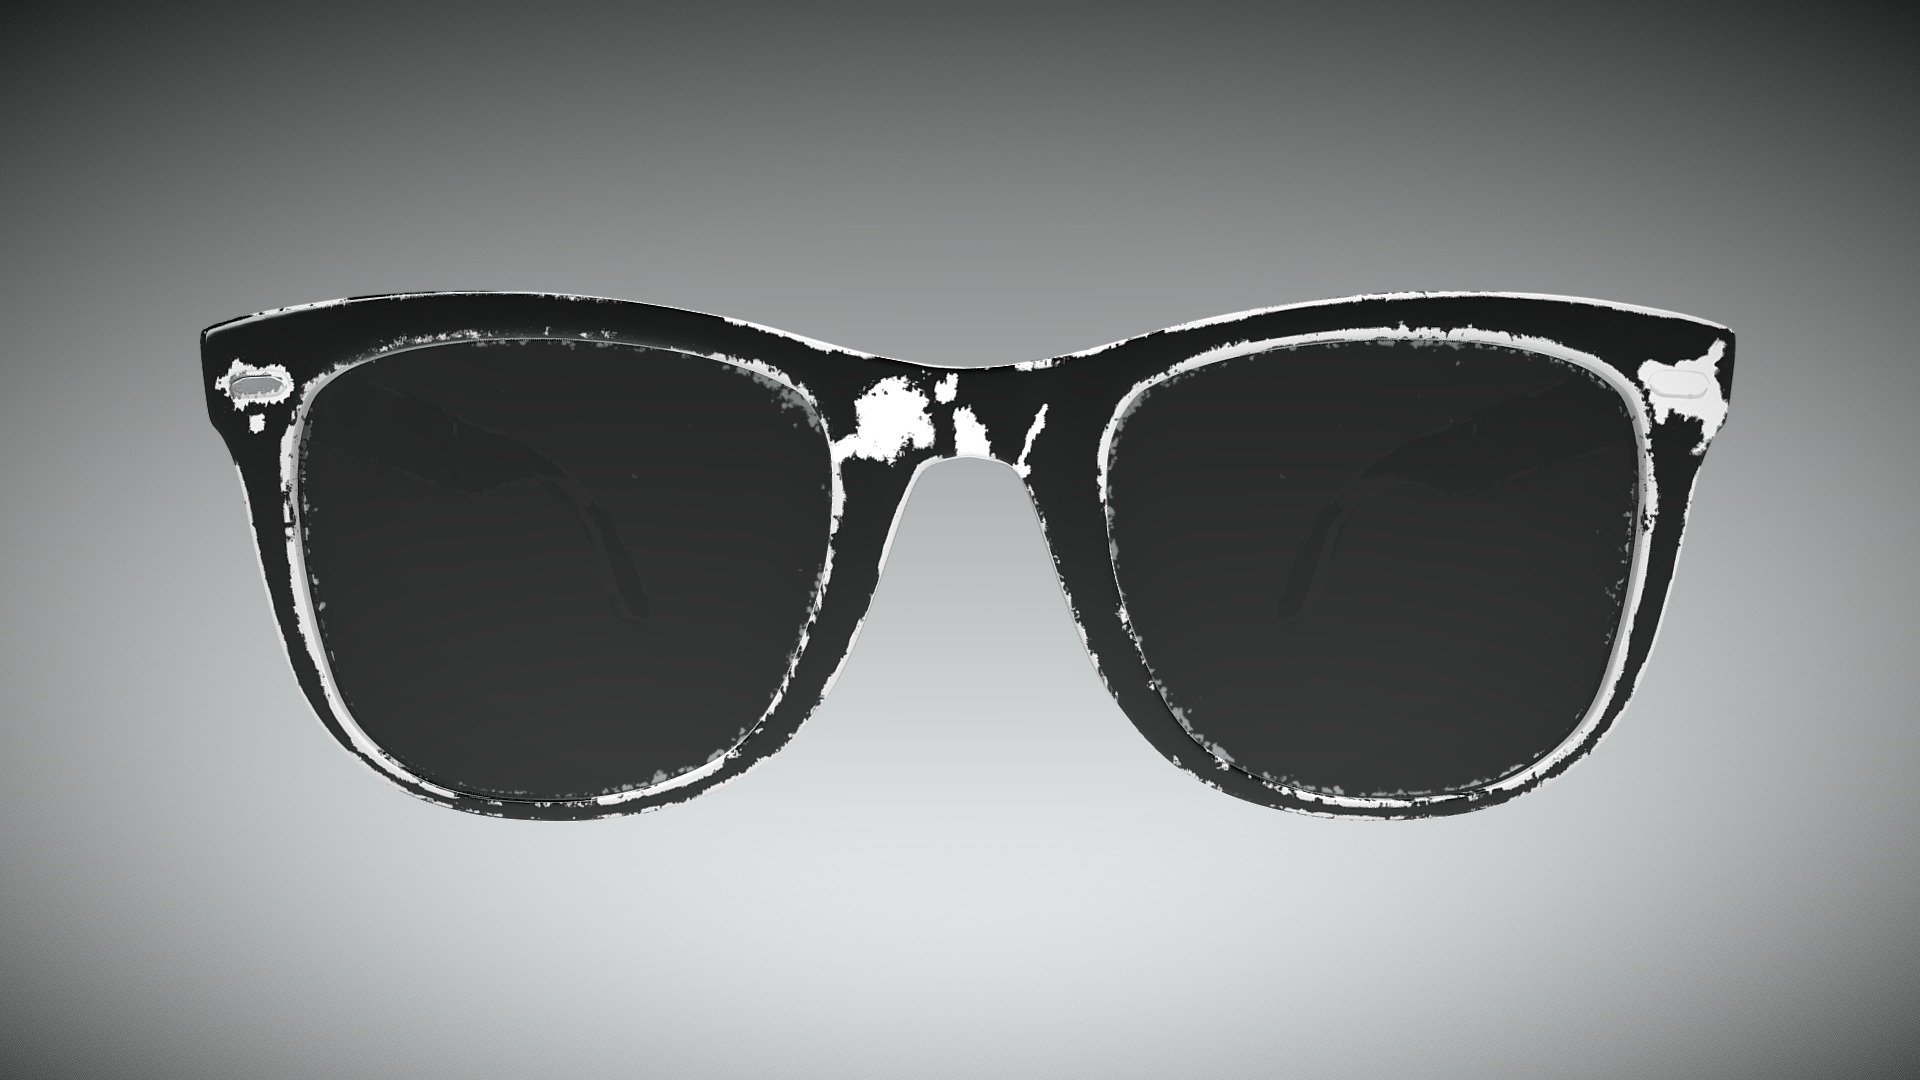 Model of Casey Neistat’s personal glasses

Re-watched some vlogs for the best reference

Couldn't add the phone number on the sides though :P

Modeling in Blender 3D

Texturing in Substance Painter 2 and Photoshop - Casey Neistat’s glasses - Buy Royalty Free 3D model by themaxirule 3d model